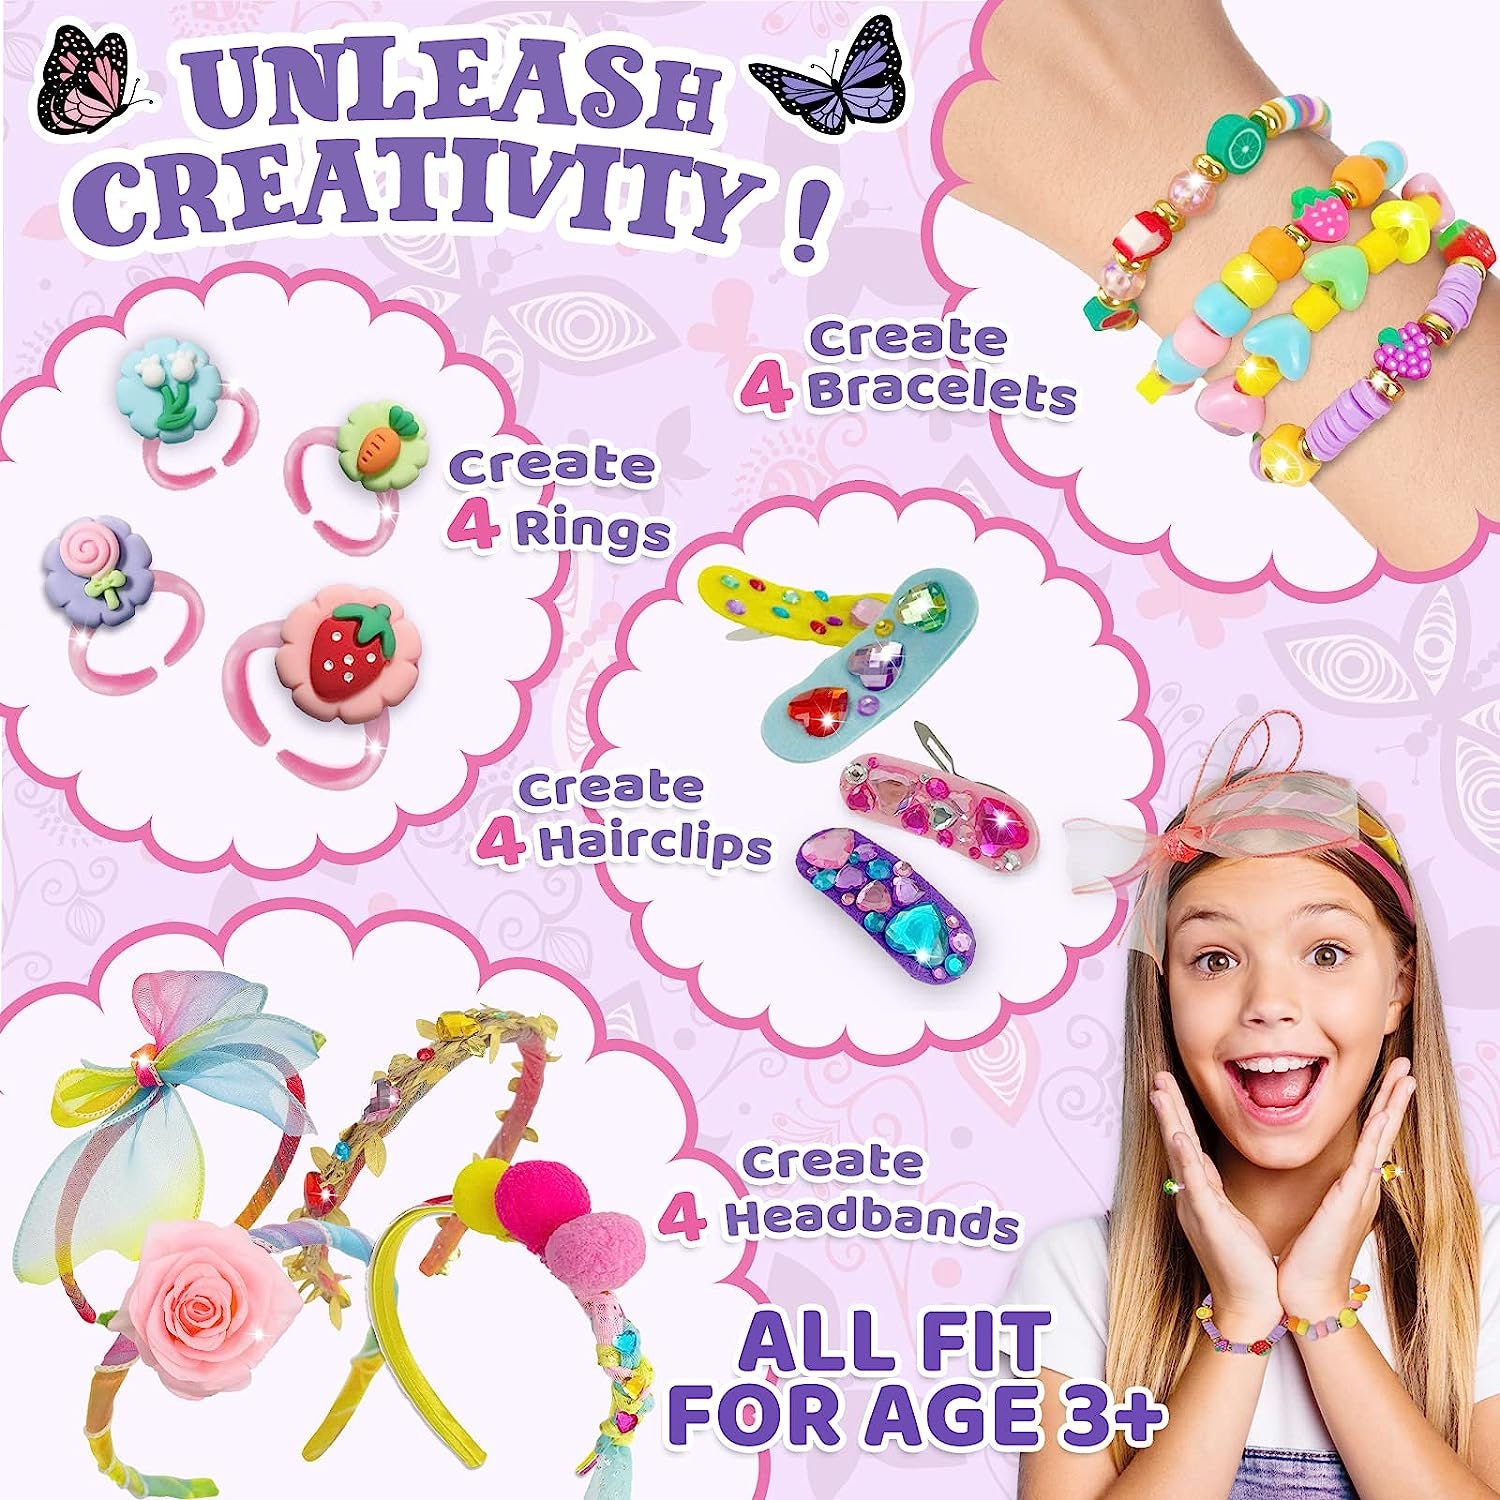 DIY 12 Headband Kit Educational Toys for Girls to Create Unique Hair Accessories Great Girl Gift and Craft for Girls